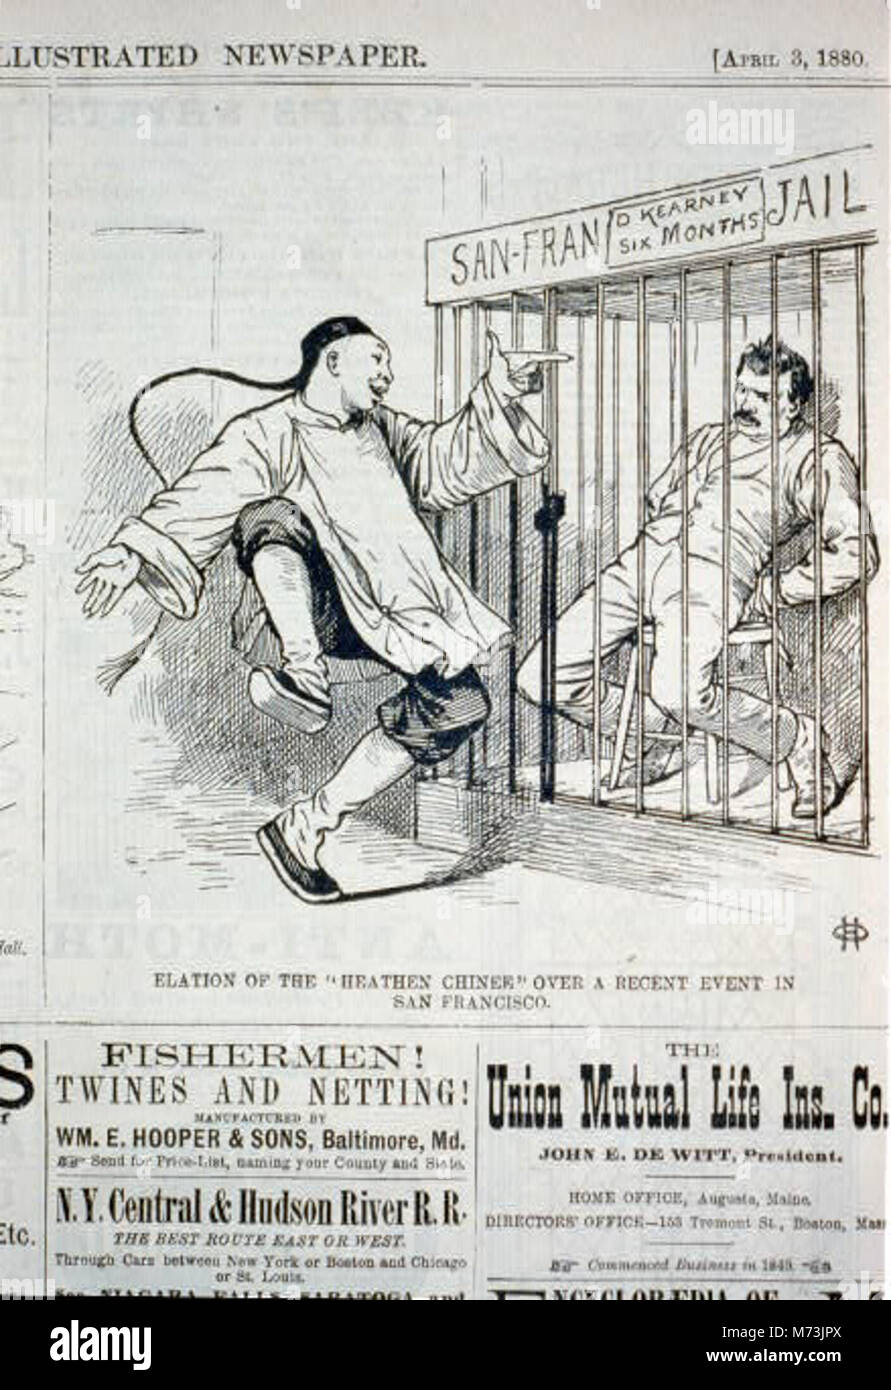 Elation of the 'heathen Chinee' over a recent event in San Francisco (caricature of a Chinese man pointing and laughing at Denis Kearney in San Francisco jail) LCCN2001696528 Stock Photo